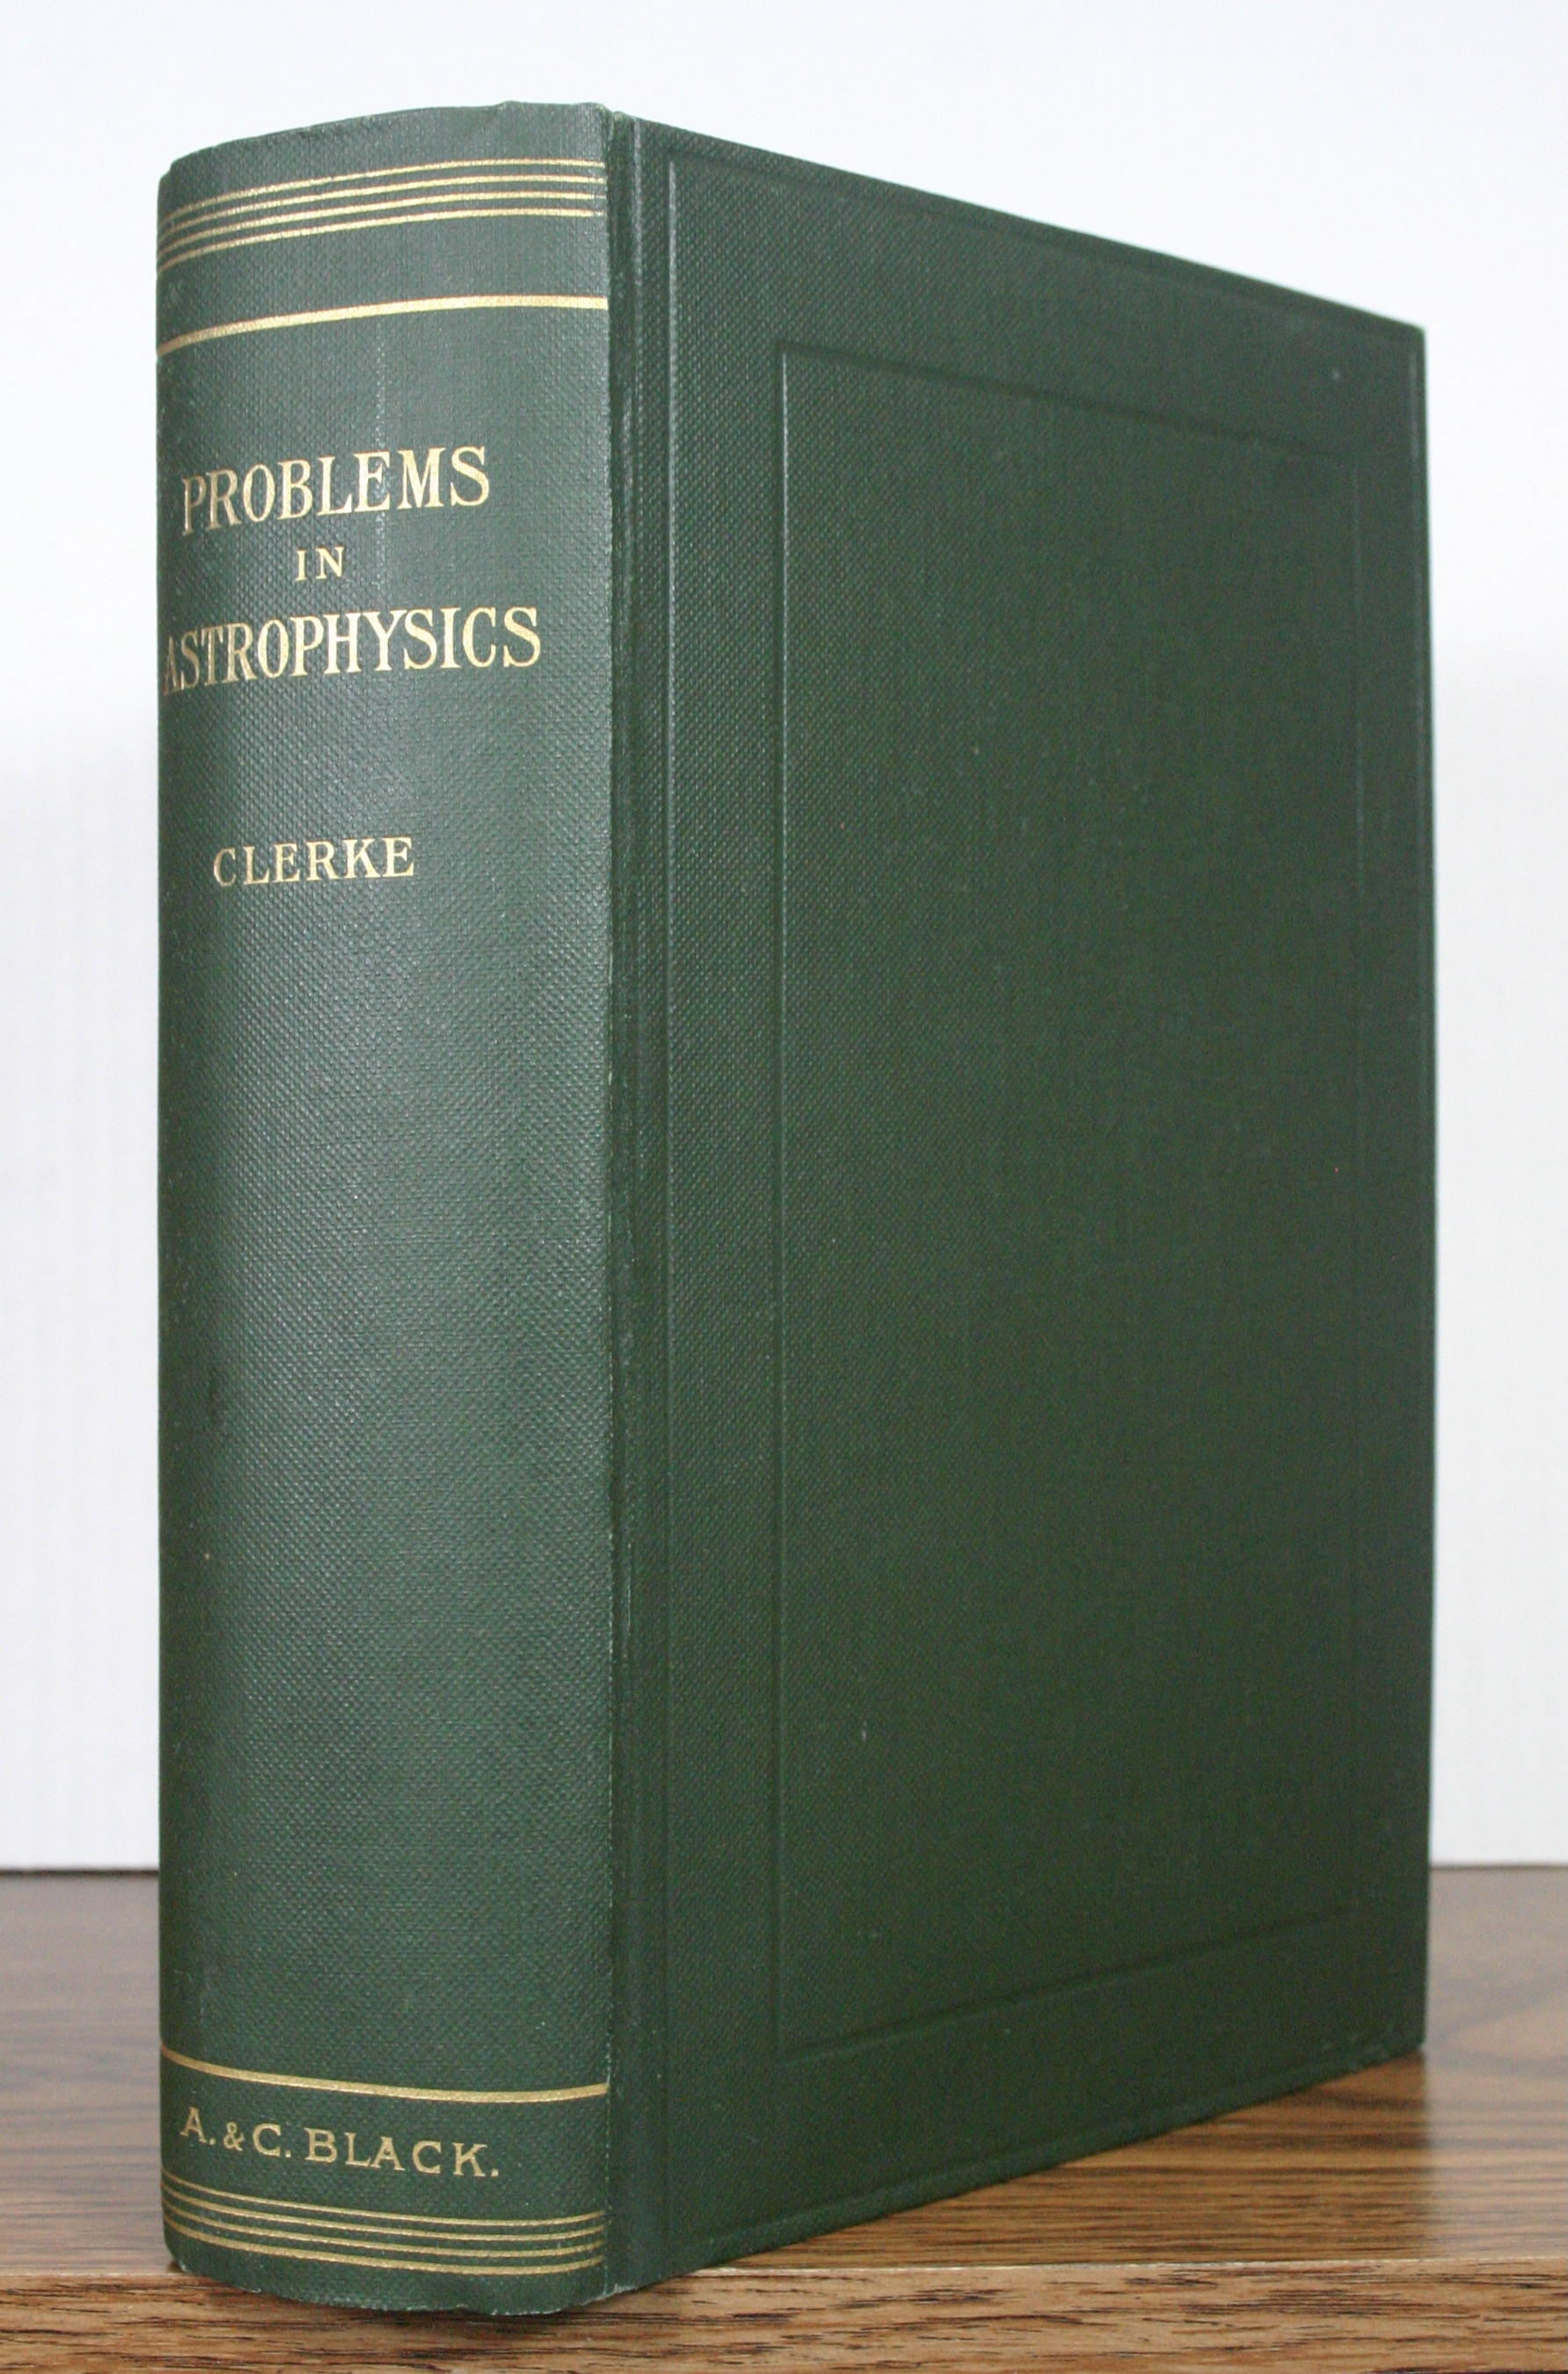 Problems in Astrophysics first edition